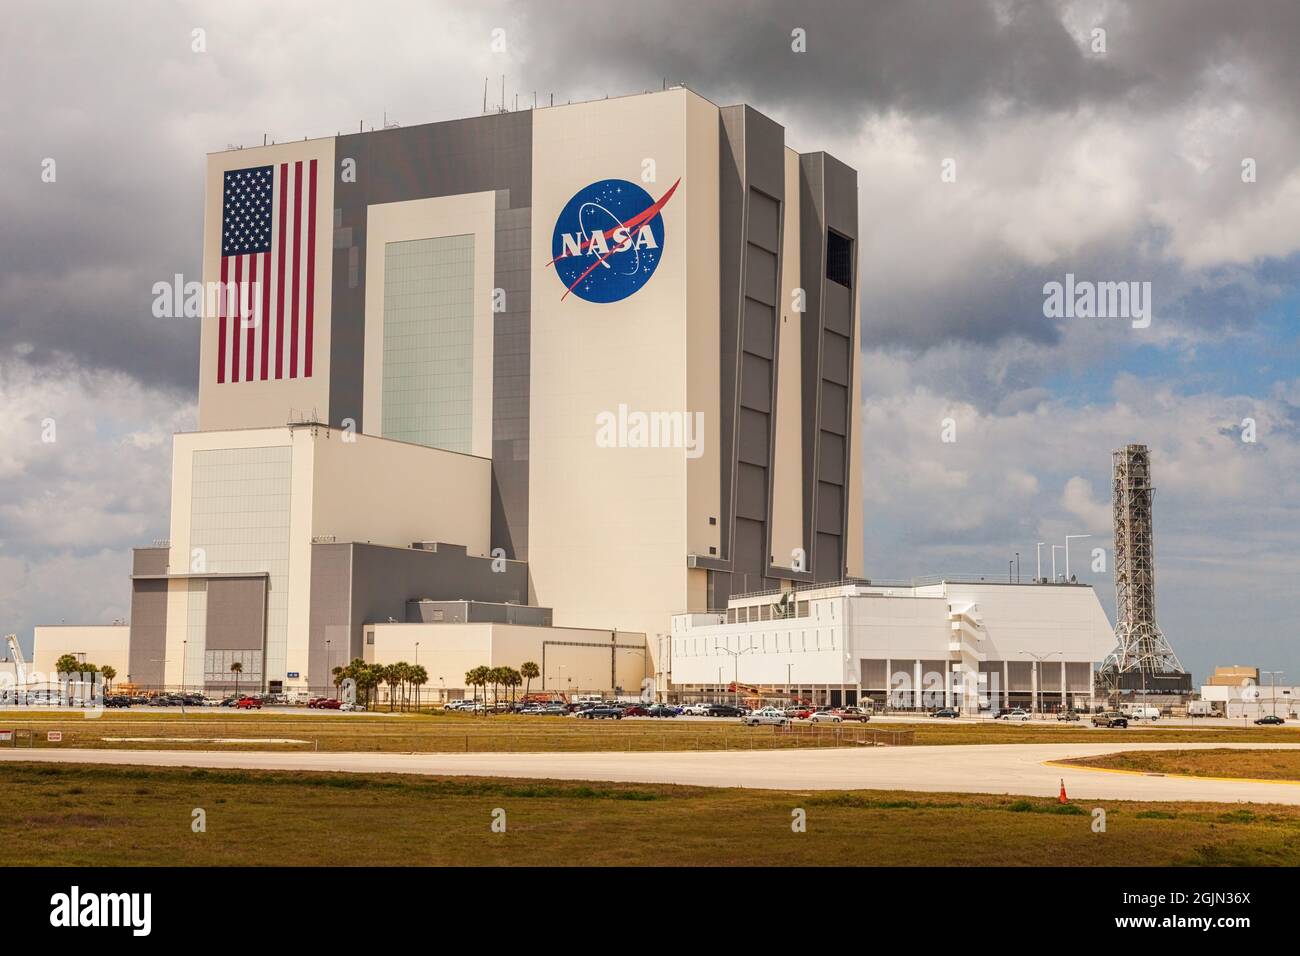 KENNEDY SOACE CENTER, USA - APRILE 21: NASS Vehicle Assembly Building presso il Kennedy Space Center, Florida. Foto Stock